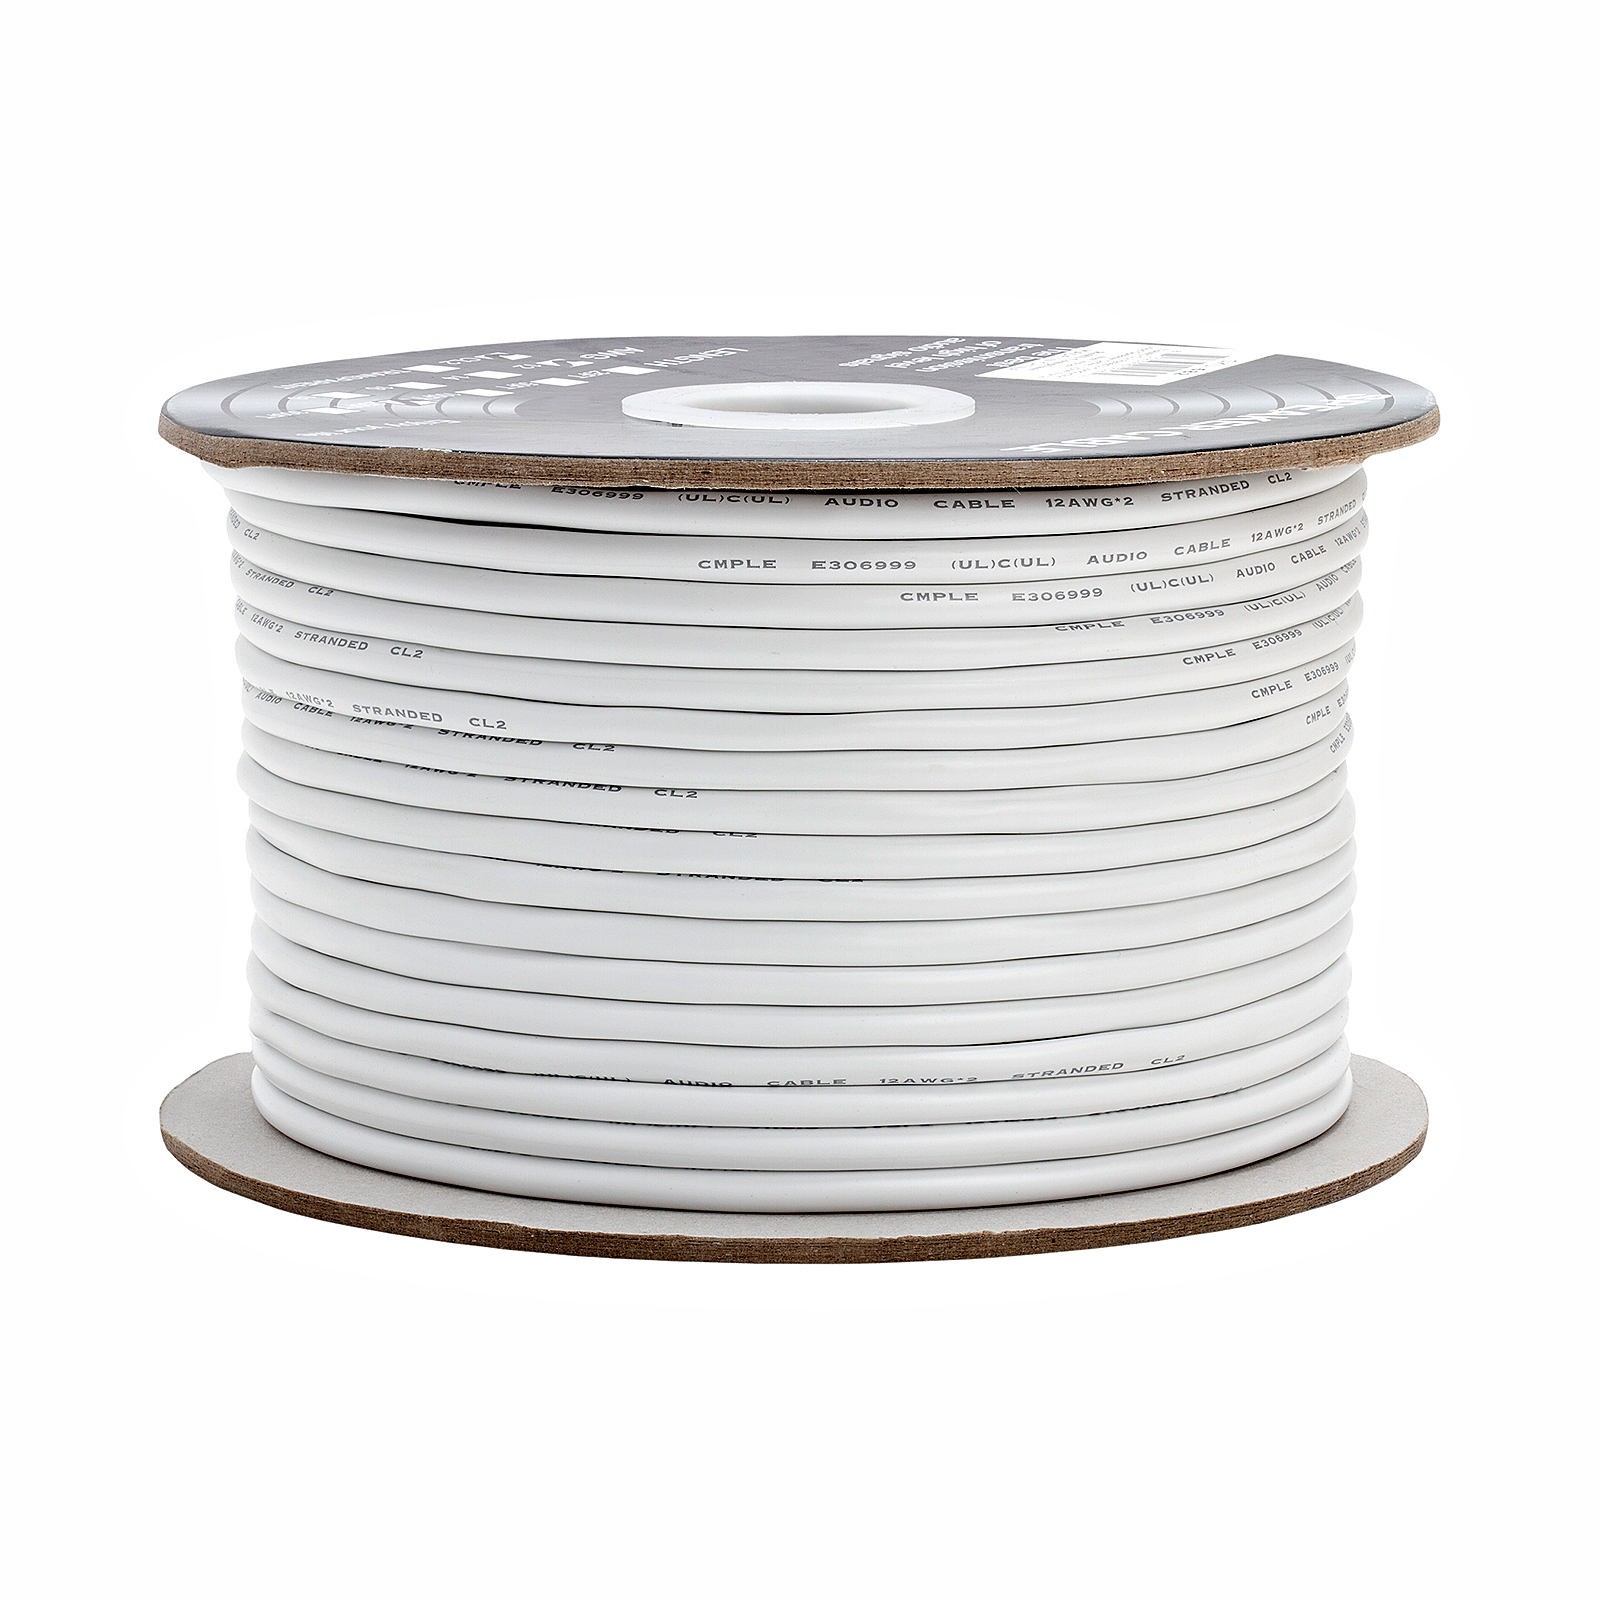 Cmple - 250FT 14AWG Speaker Wire Cable with 2 Conductor Speaker Cable (CCA) Copper Clad Aluminum CL2 Rated In-Wall Speaker Wire for Home Theater & Car Audio - 250 Feet, White - image 3 of 6